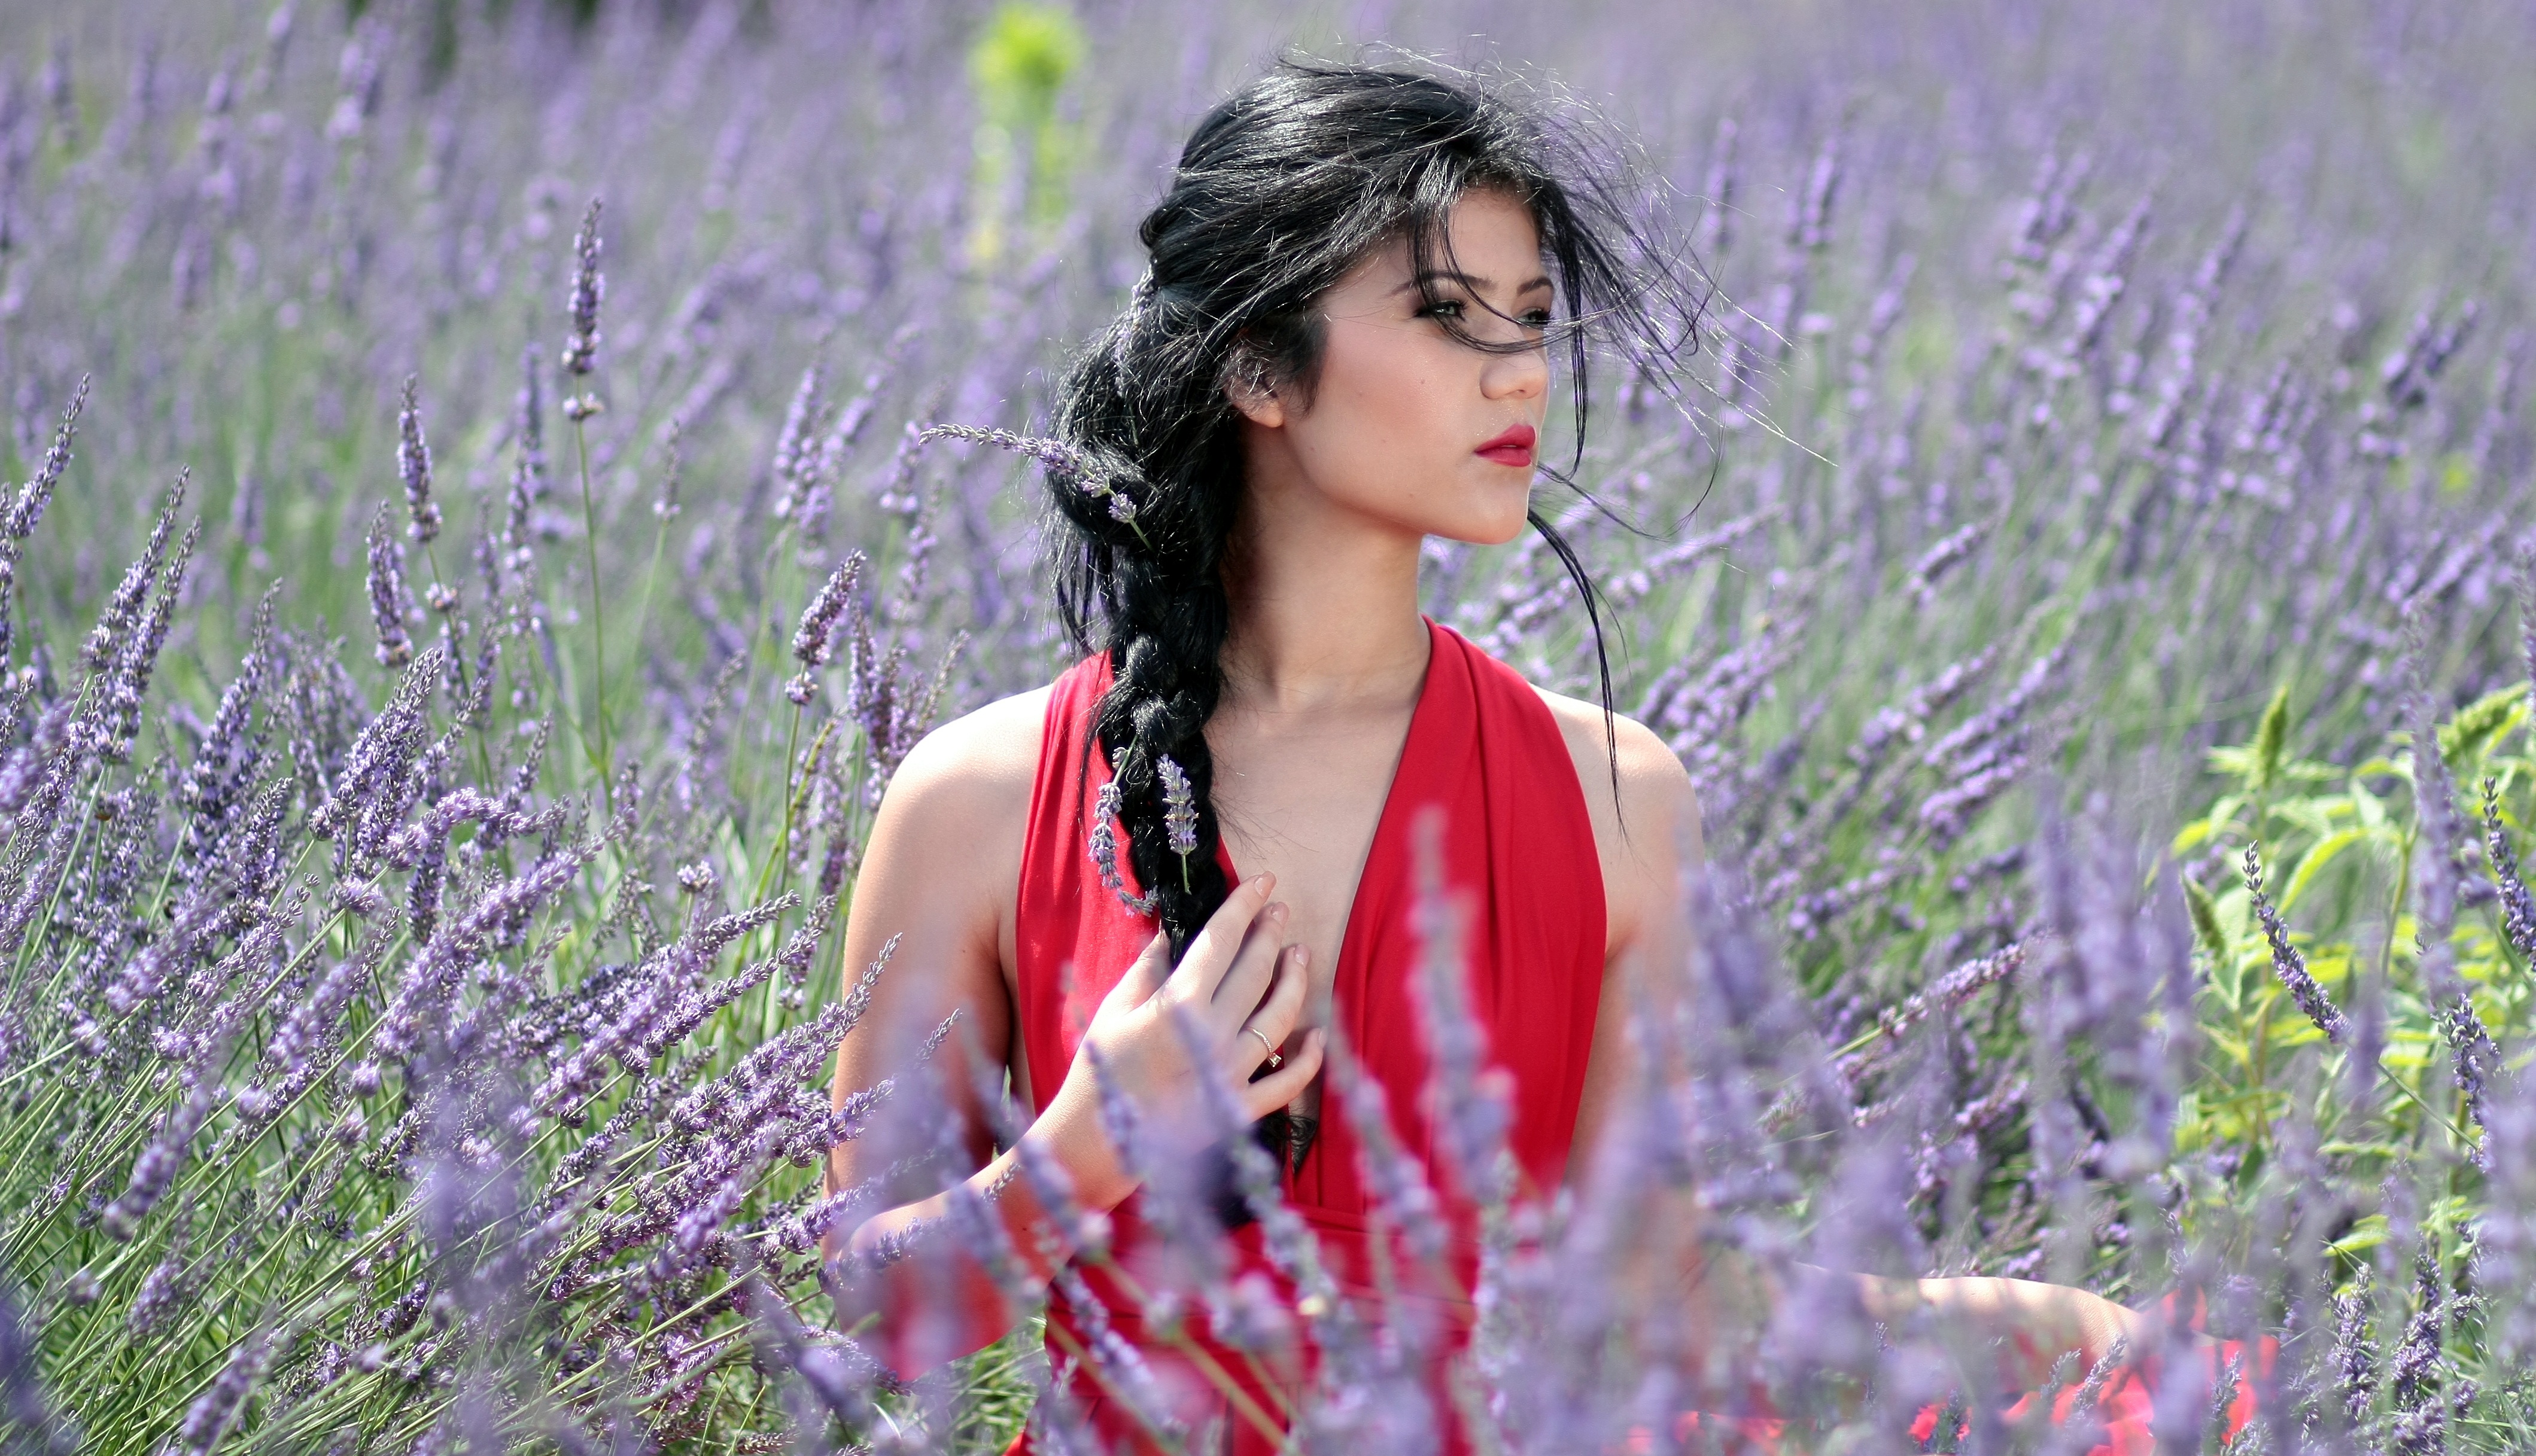 Beautiful Girl in Lavender Flowers image - Free stock photo - Public ...